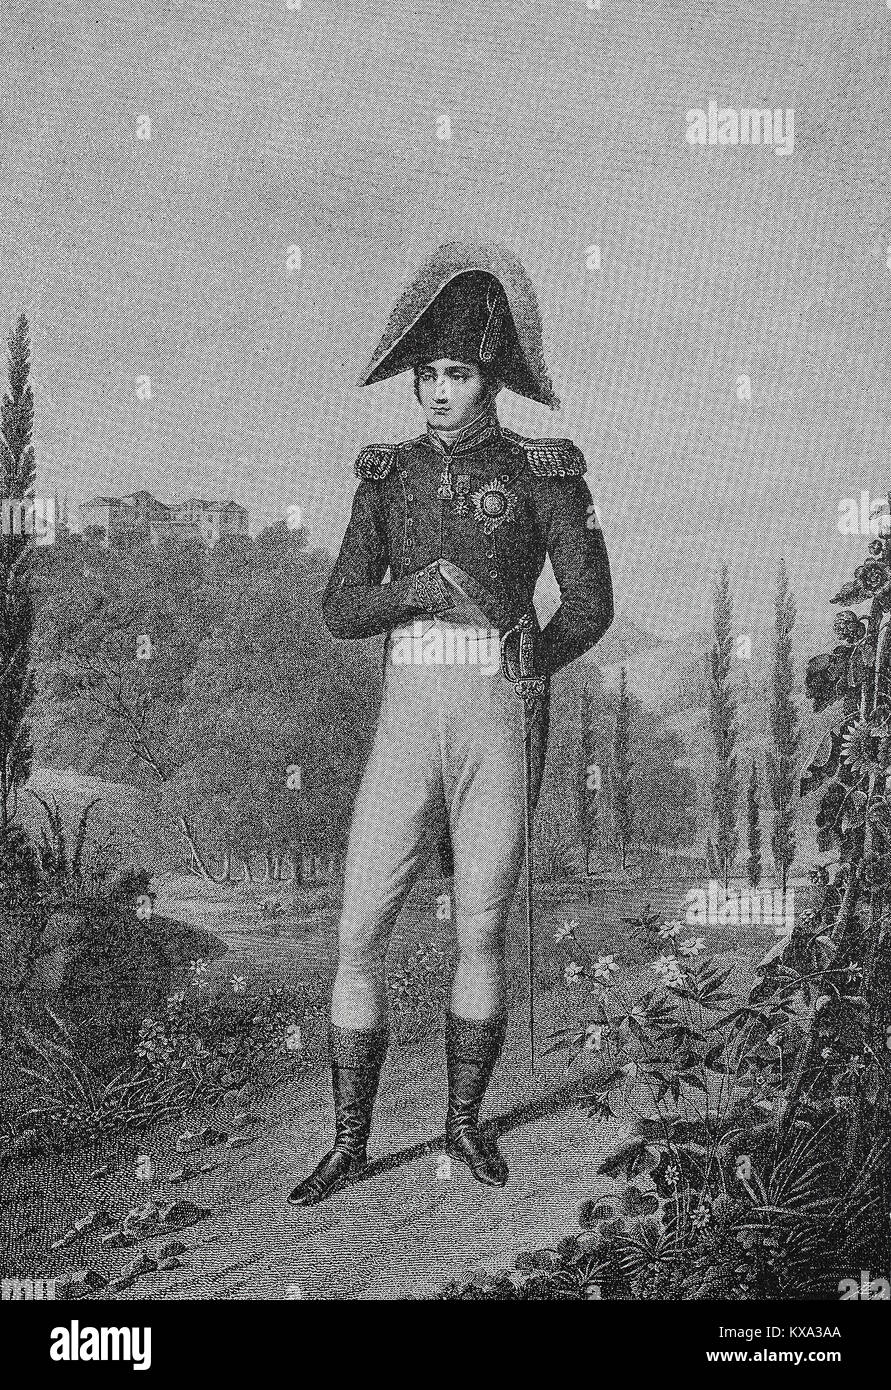 Jerome-Napoleon Bonaparte, born Girolamo Buonaparte, 15 November 1784 - 24 June 1860, was the youngest brother of Napoleon I and reigned as Jerome I, formally Hieronymus Napoleon, King of Westphalia, between 1807 and 1813, French, digital improved reproduction from an original woodcut or illustration from the year 1880 Stock Photo